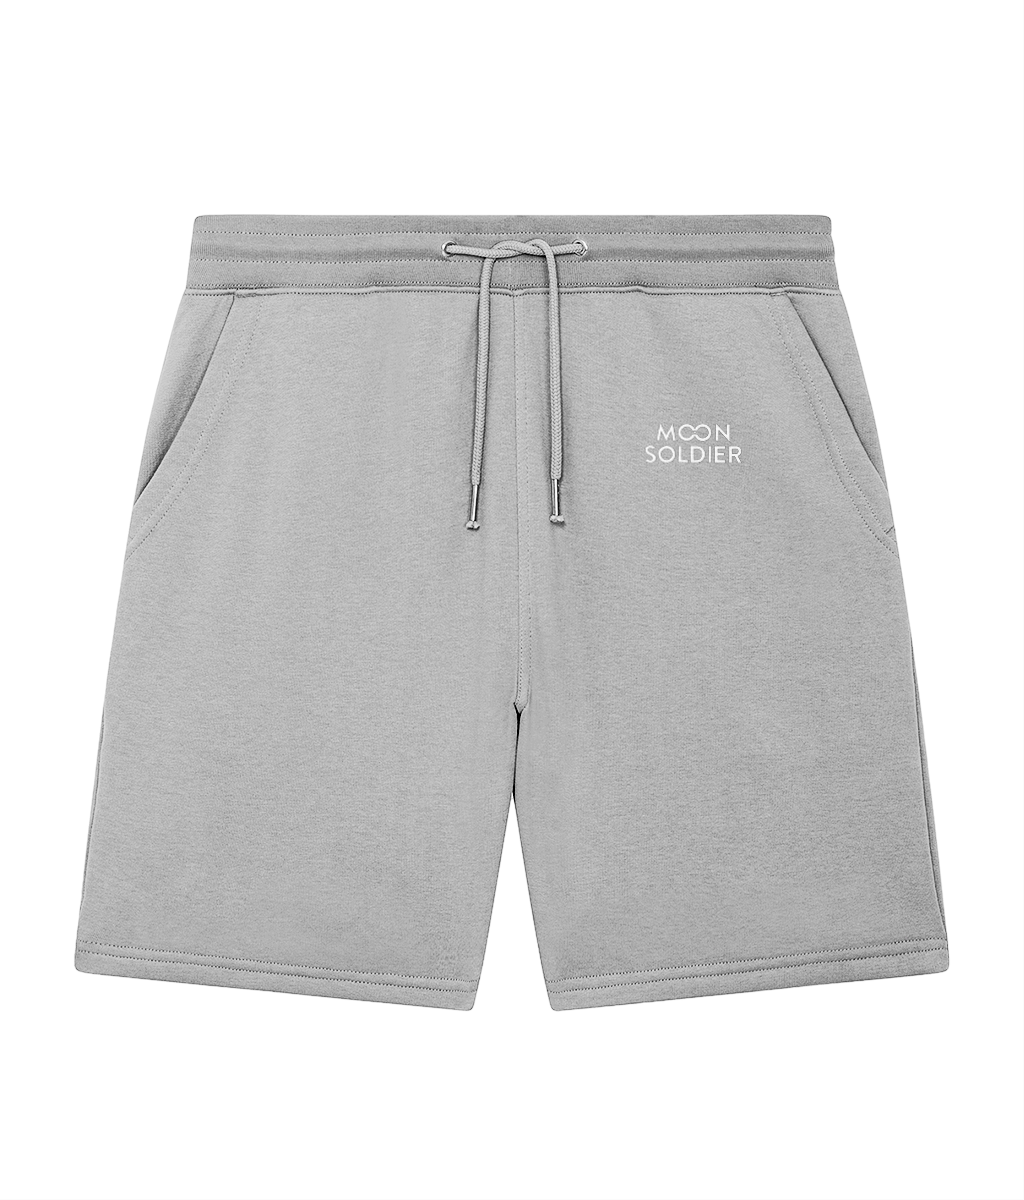 Moon Soldier Shorts - Moon Soldier